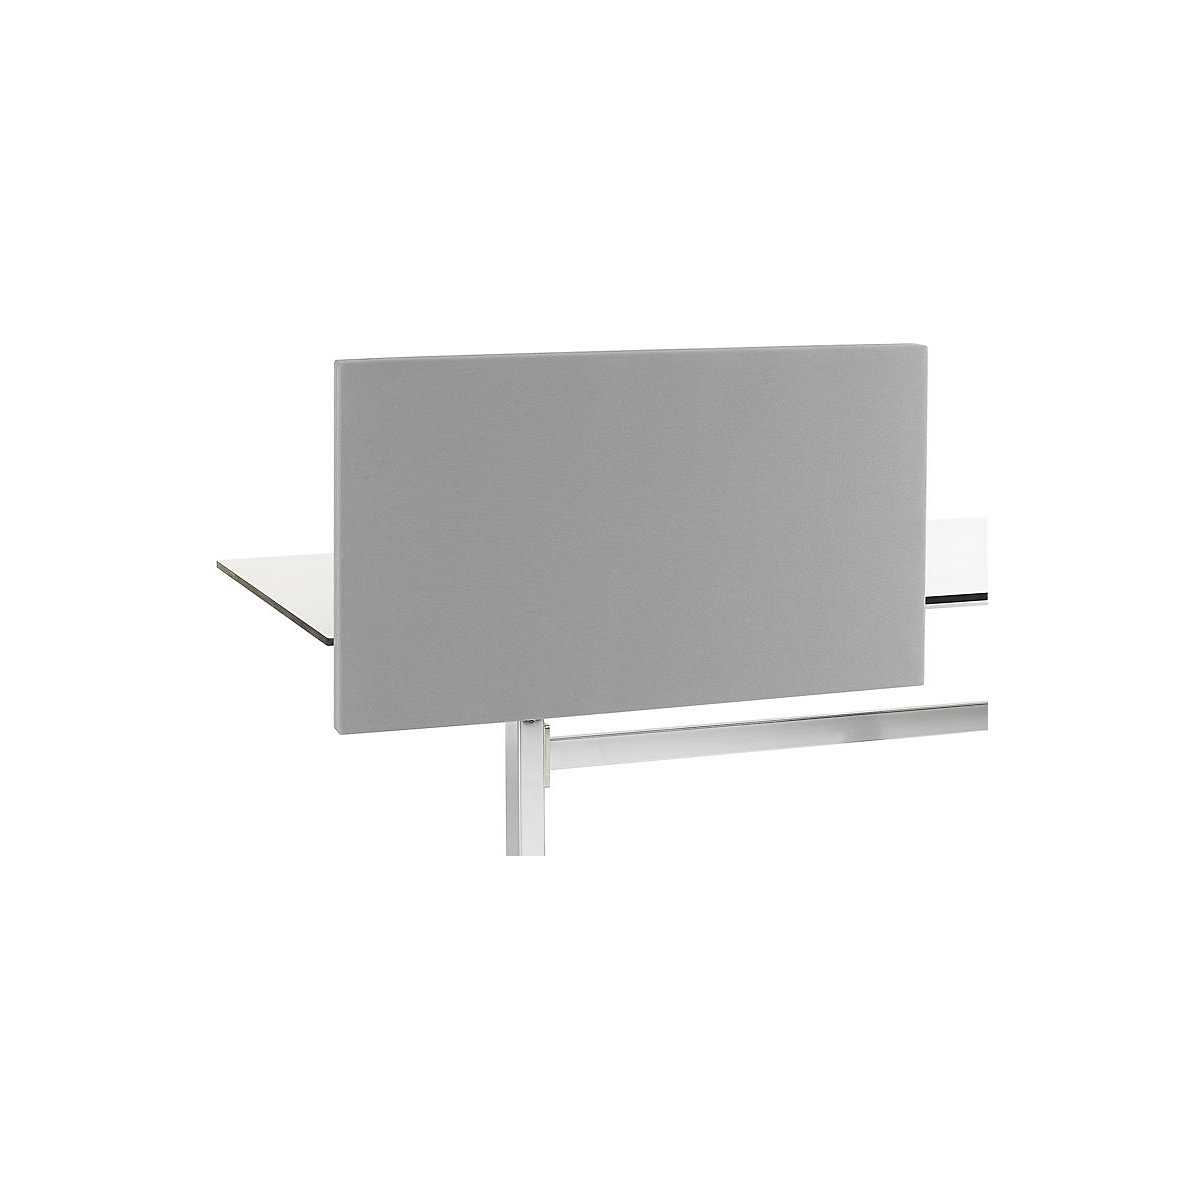 Standard acoustic desk partition with straight corners, HxW 650 x 1200 mm, fabric, grey-1